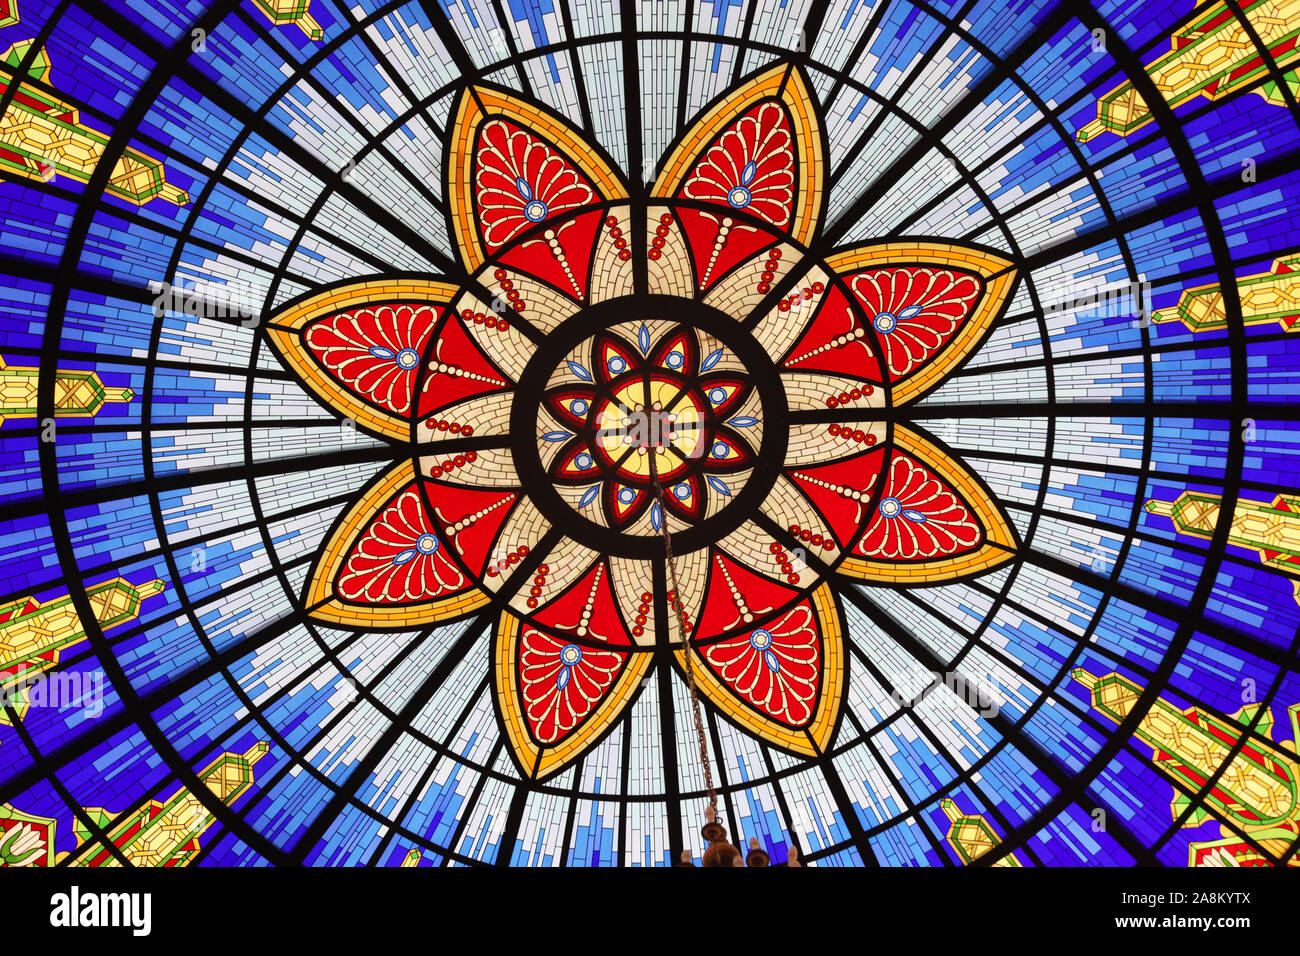 Stained glass window in the Museum of the Macedonian Struggle for sovereignty and independence in Skopje, Macedonia Stock Photo